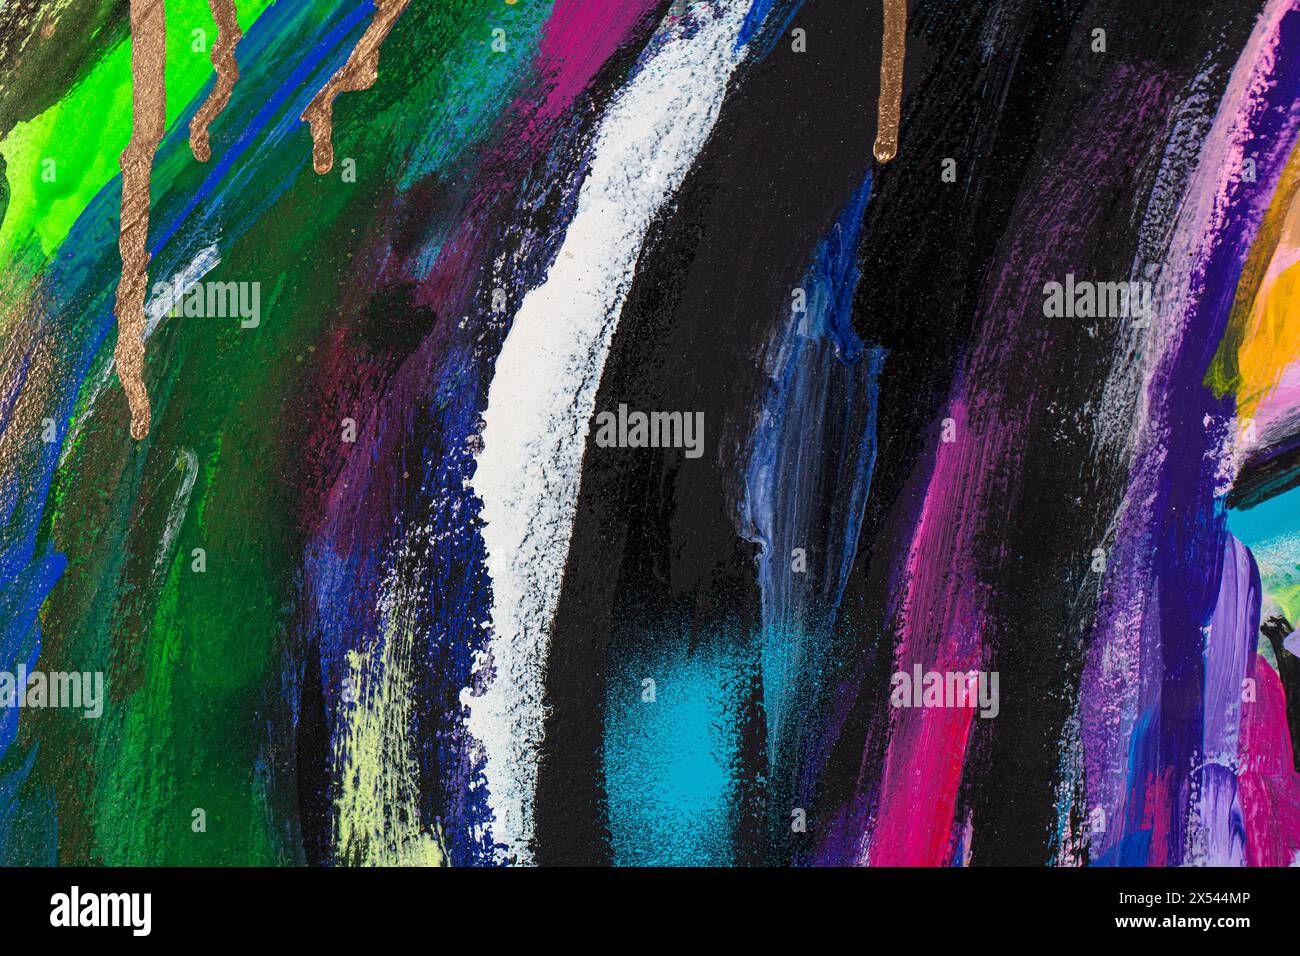 New abstract painting background with a colorful surface in a dark tone. Stock Photo